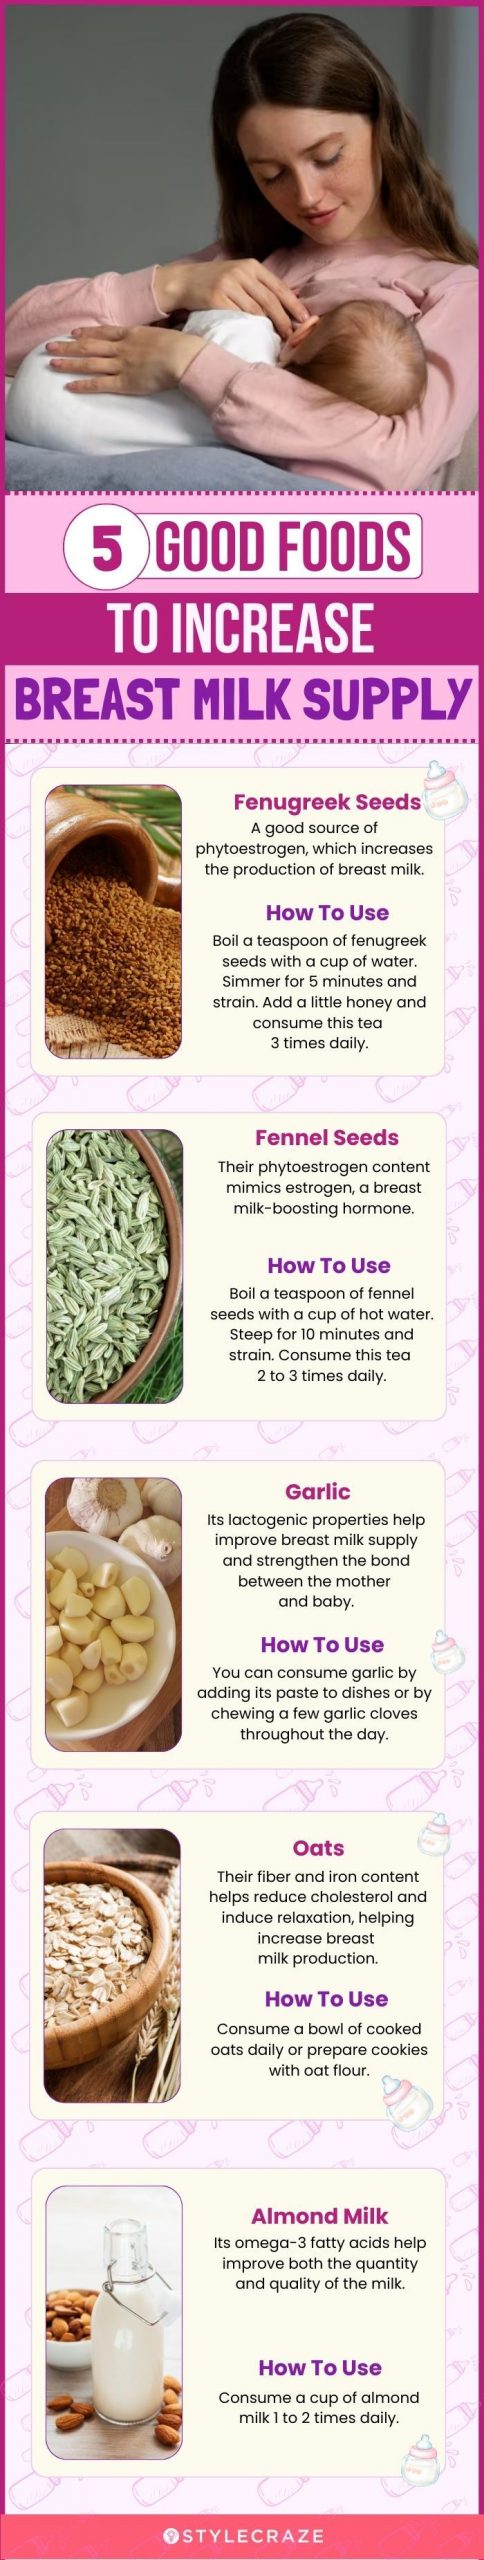 5 good foods to increase breast milk supply (infographic)